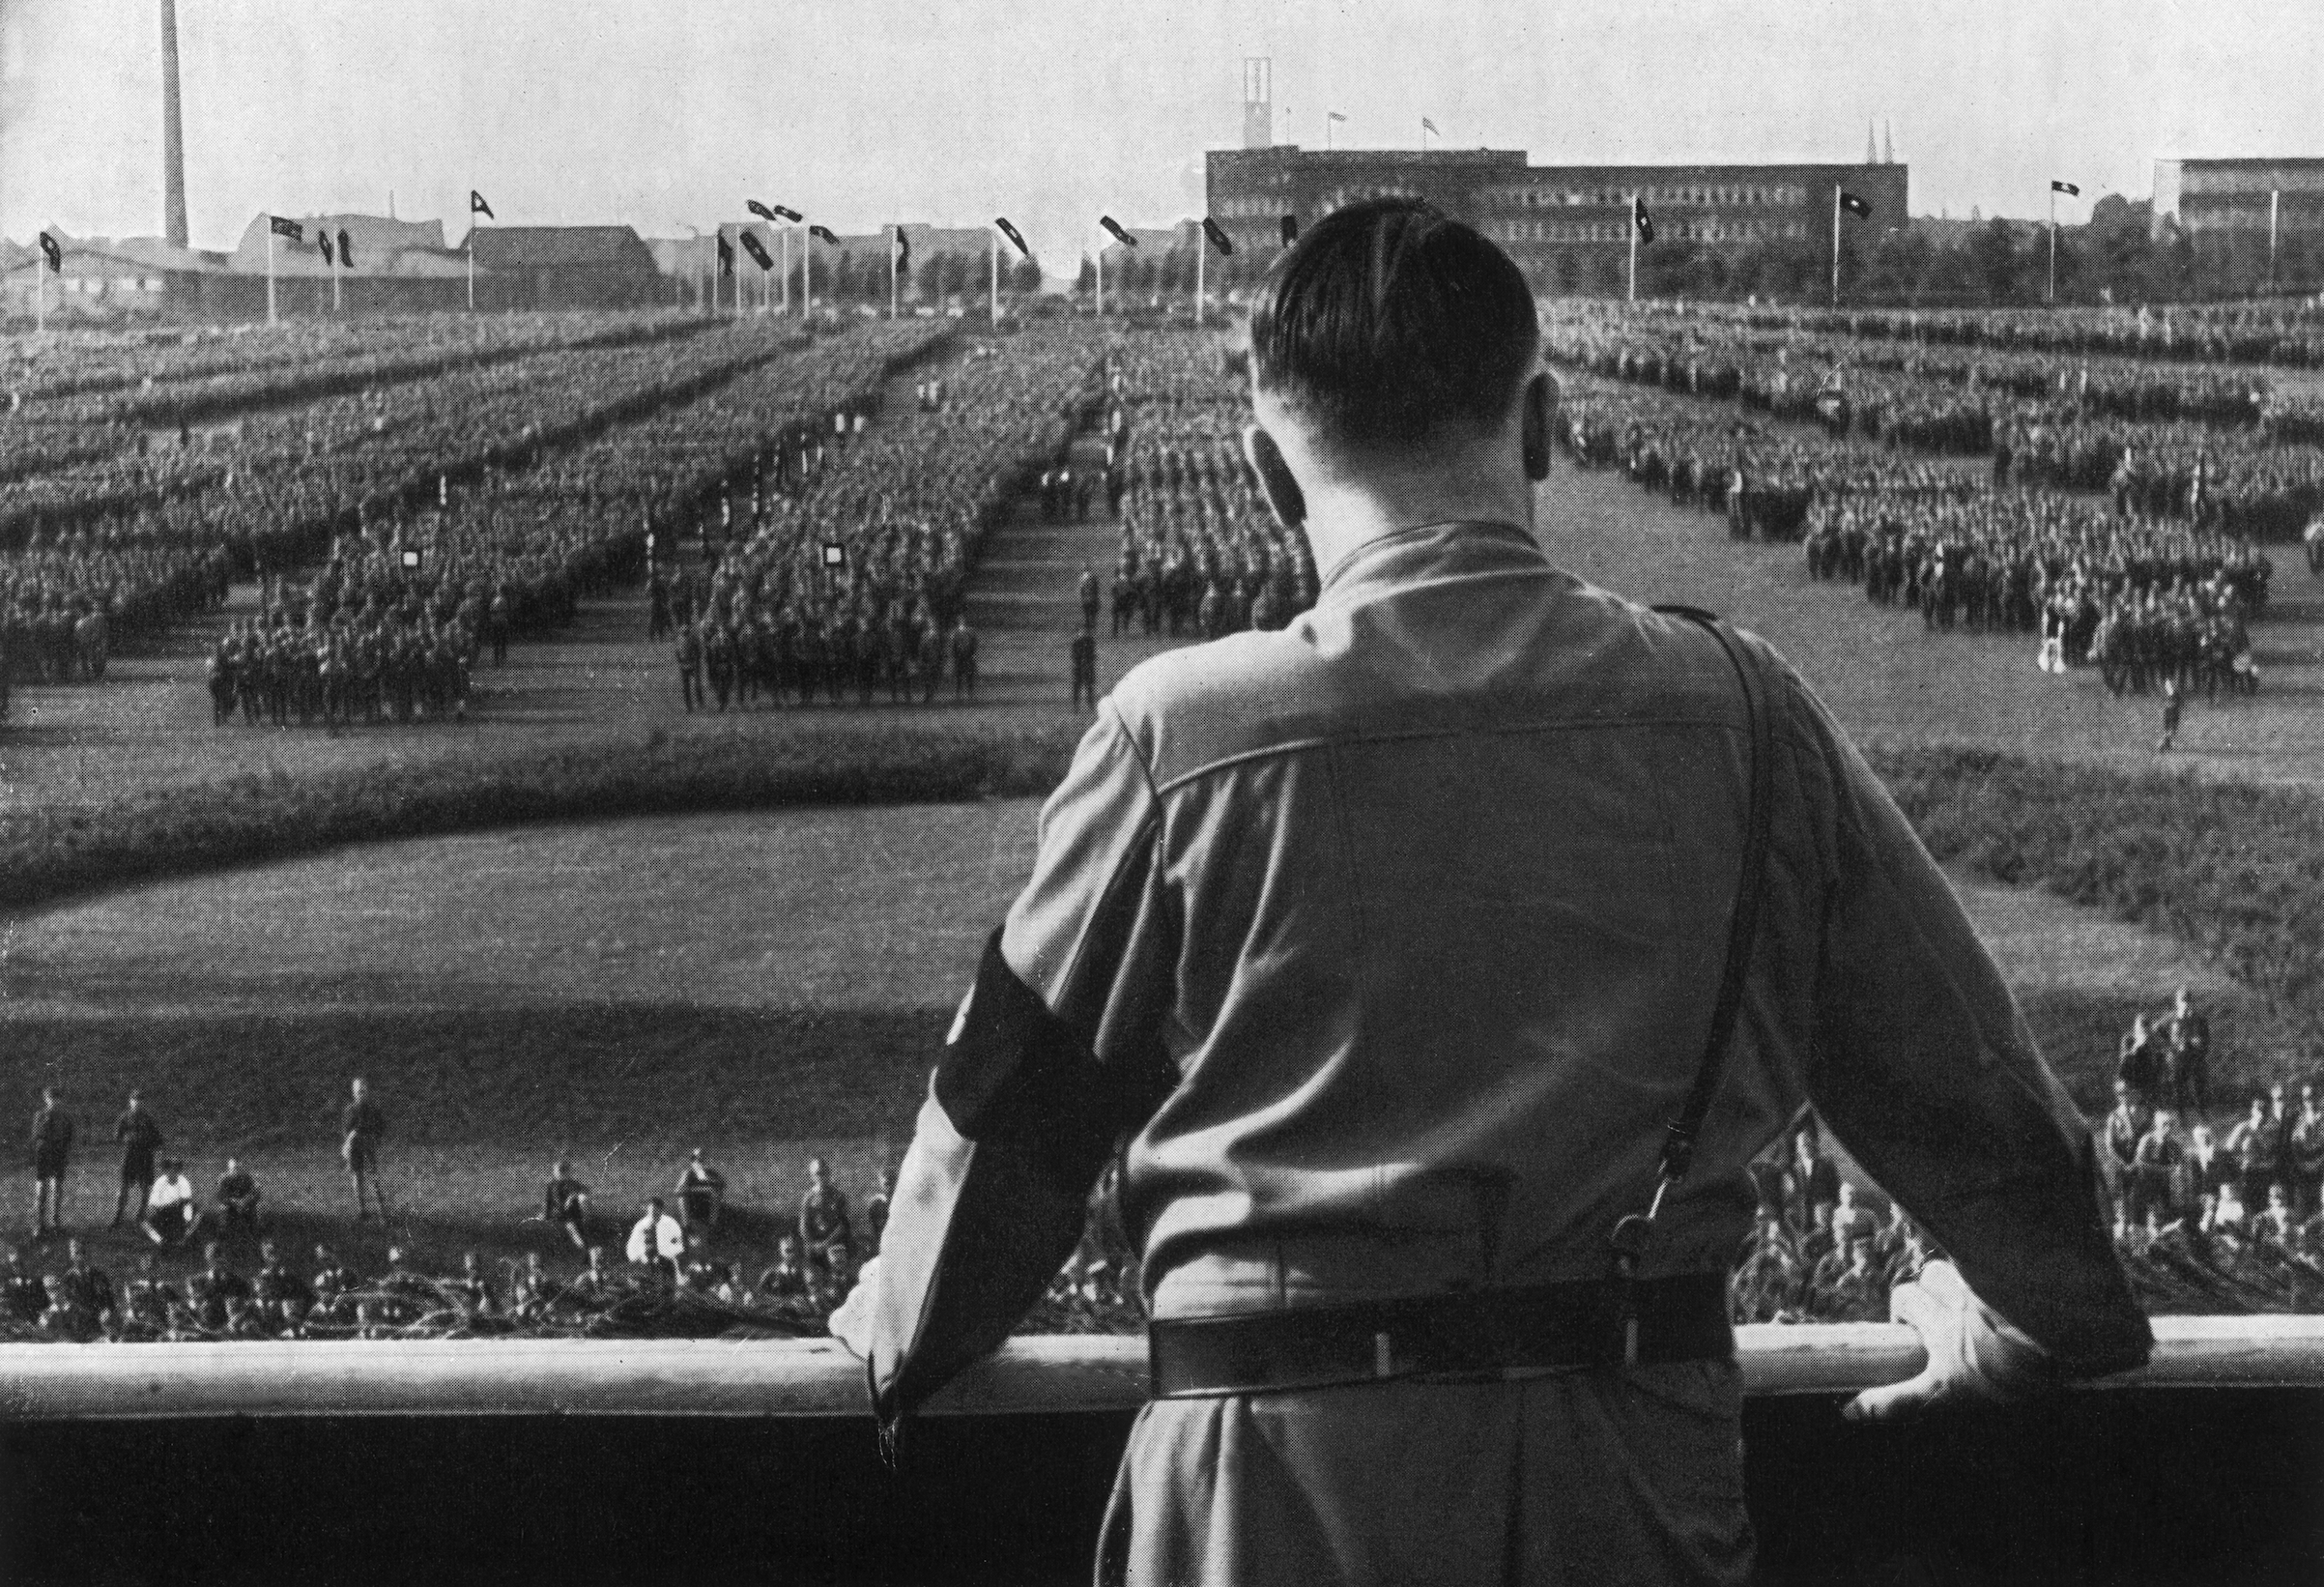 German Fuhrer and Nazi leader Adolf Hitler (1889 - 1945) addresses soldiers with his back facing the camera at a Nazi rally in Dortmund, Germany, in the 1930s. (Hulton Archive/Getty Images)